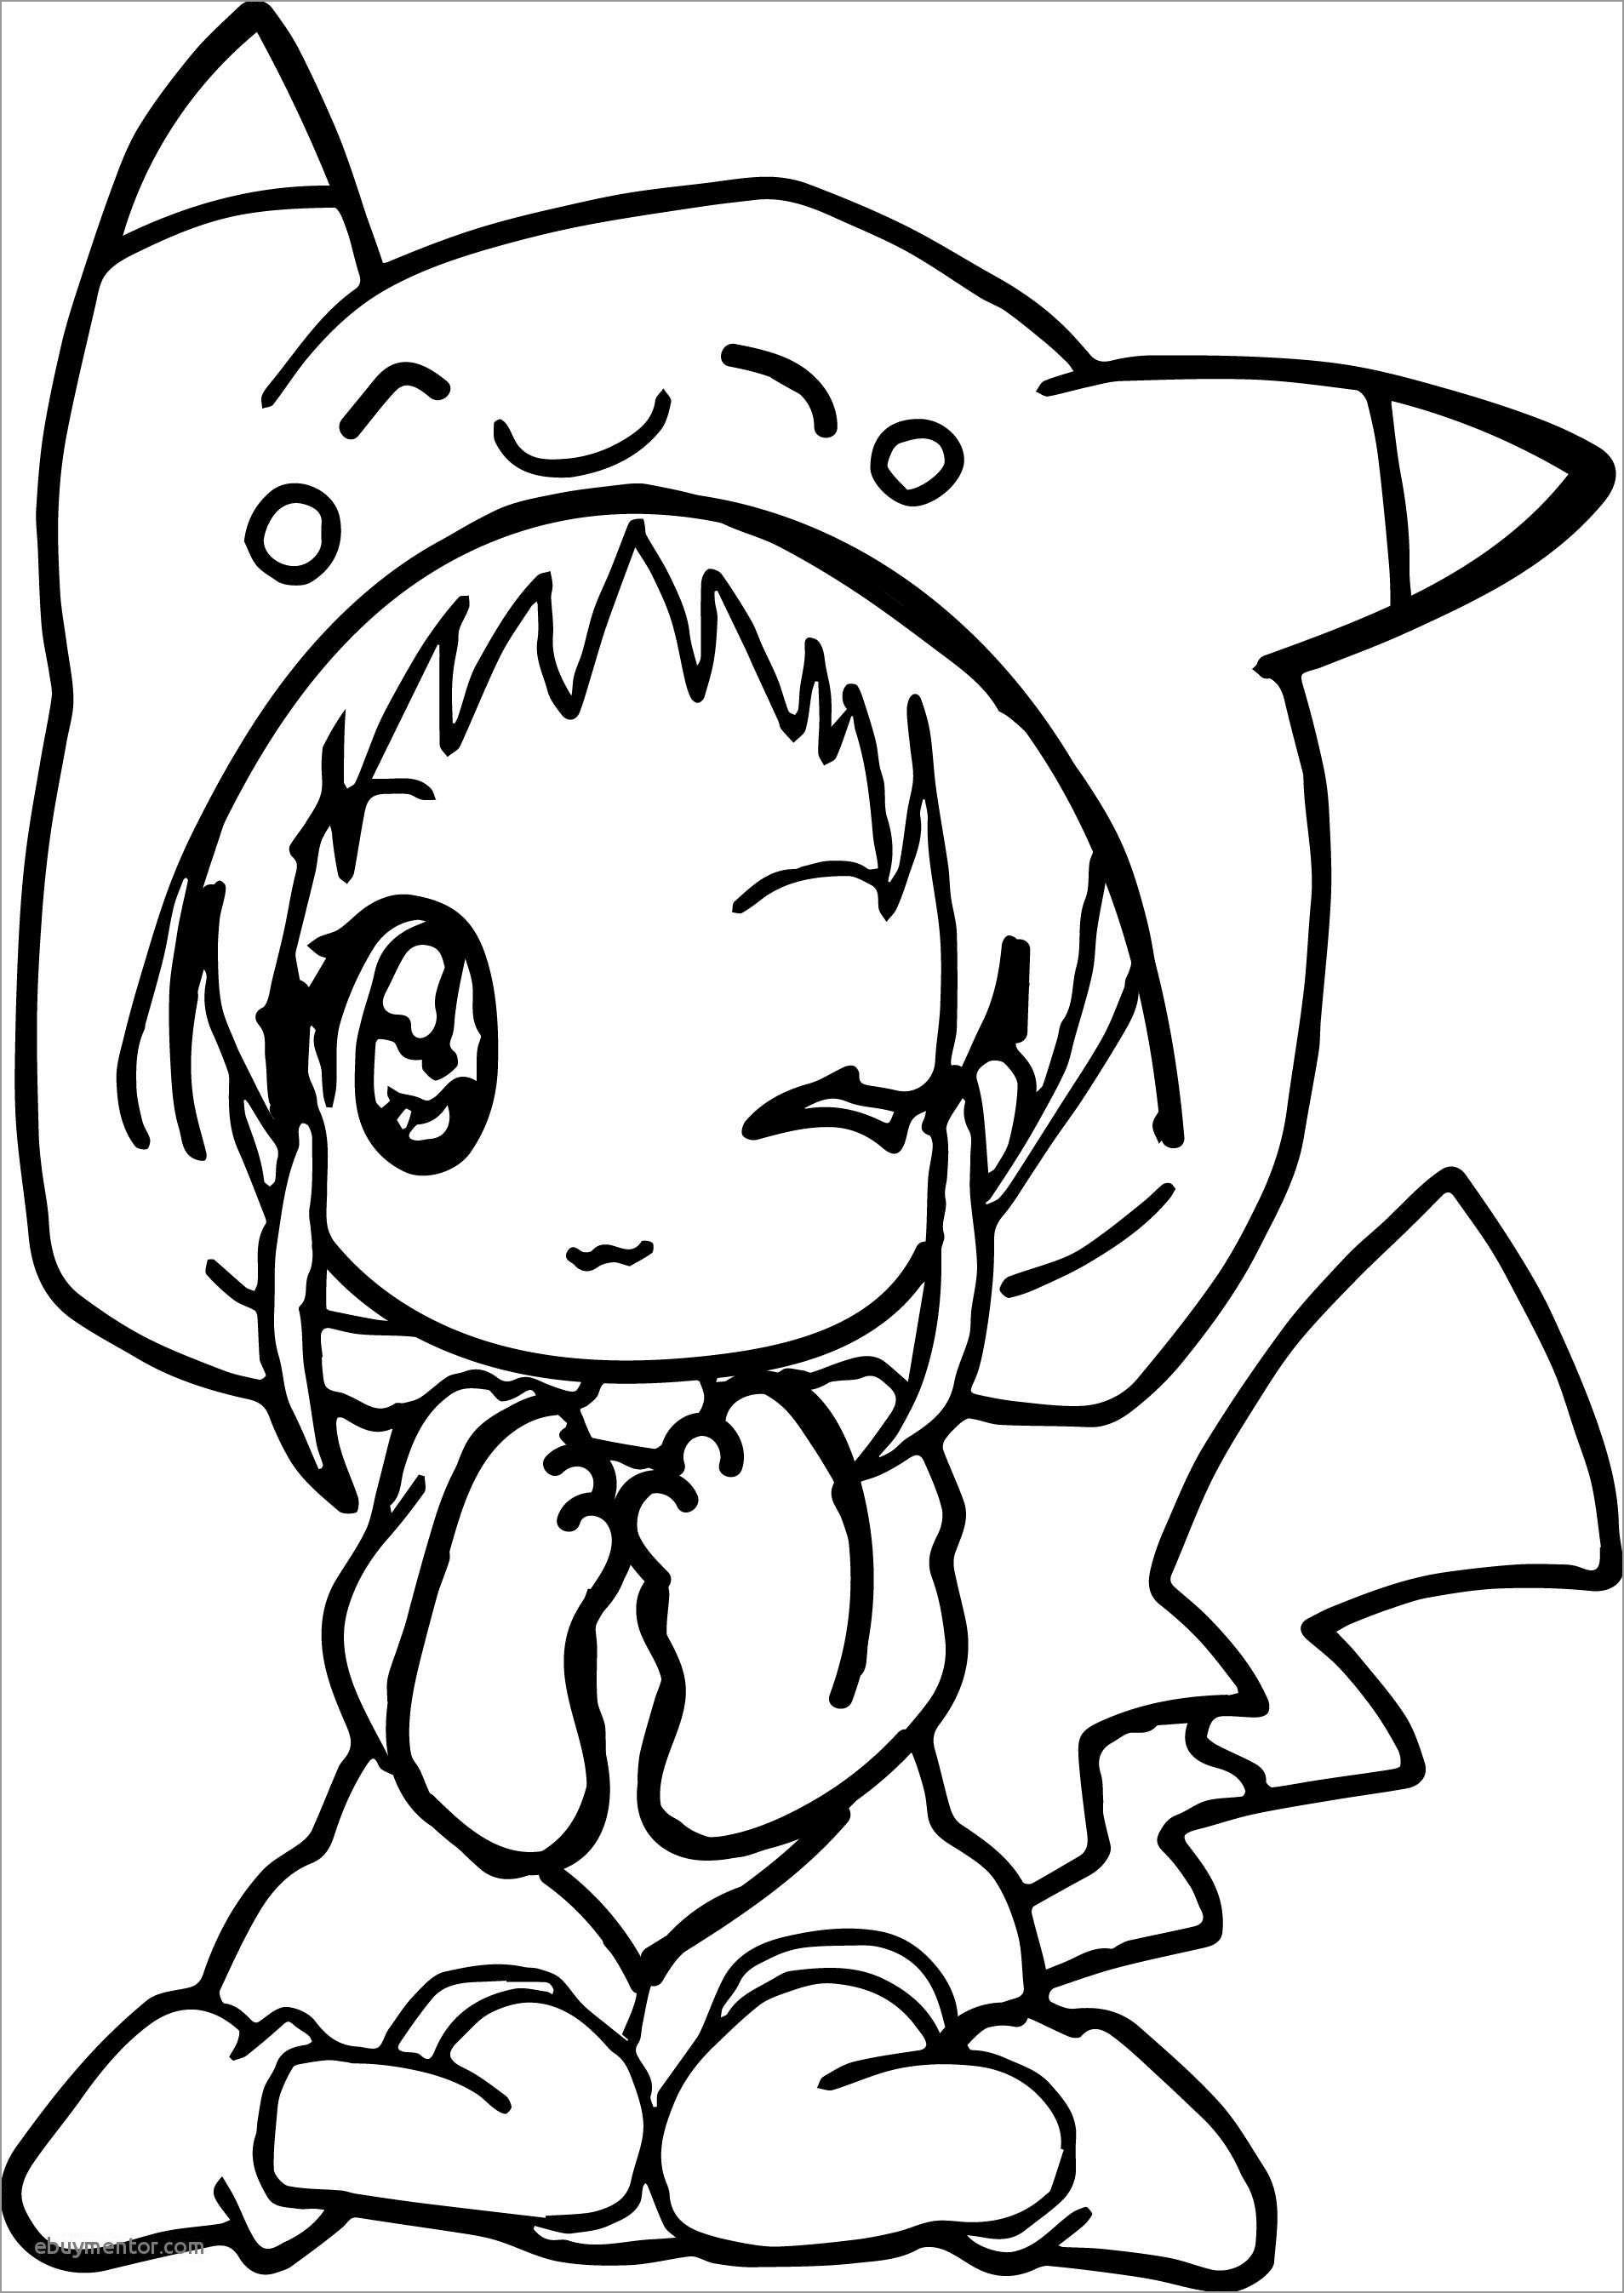 Anime Girl Coloring Pages - ColoringBay